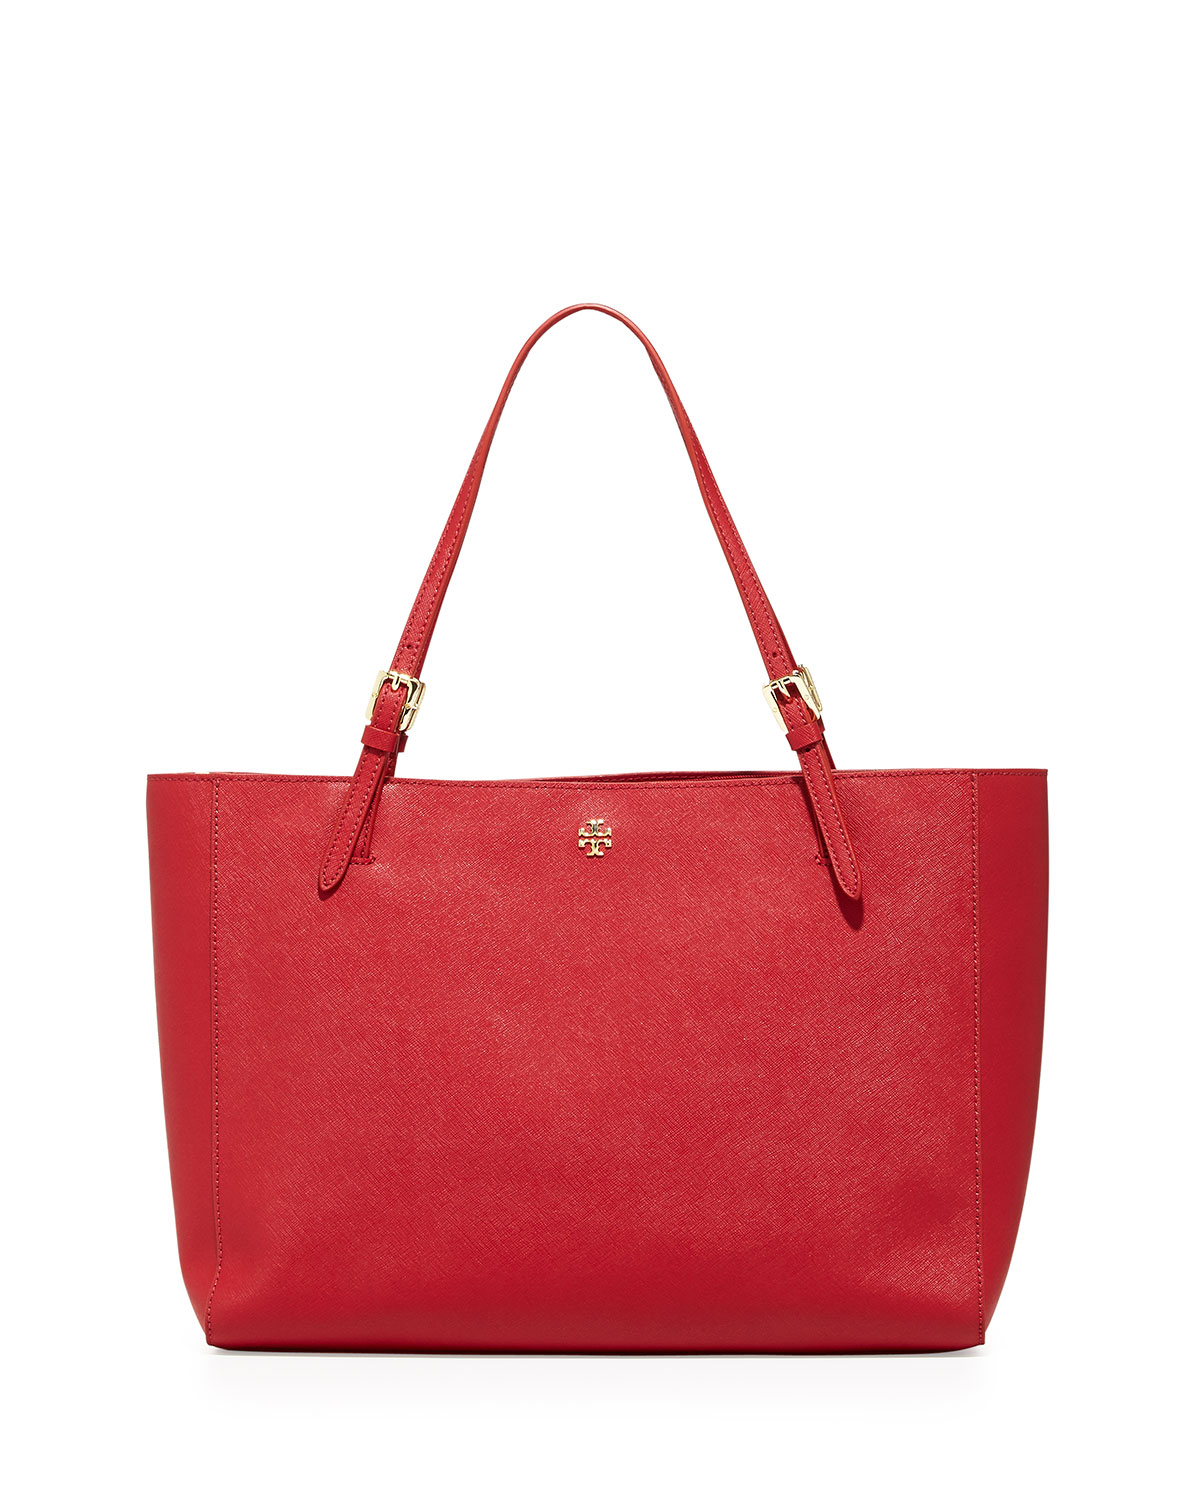 Tory burch York Saffiano Leather Tote Bag in Red (poppy) | Lyst